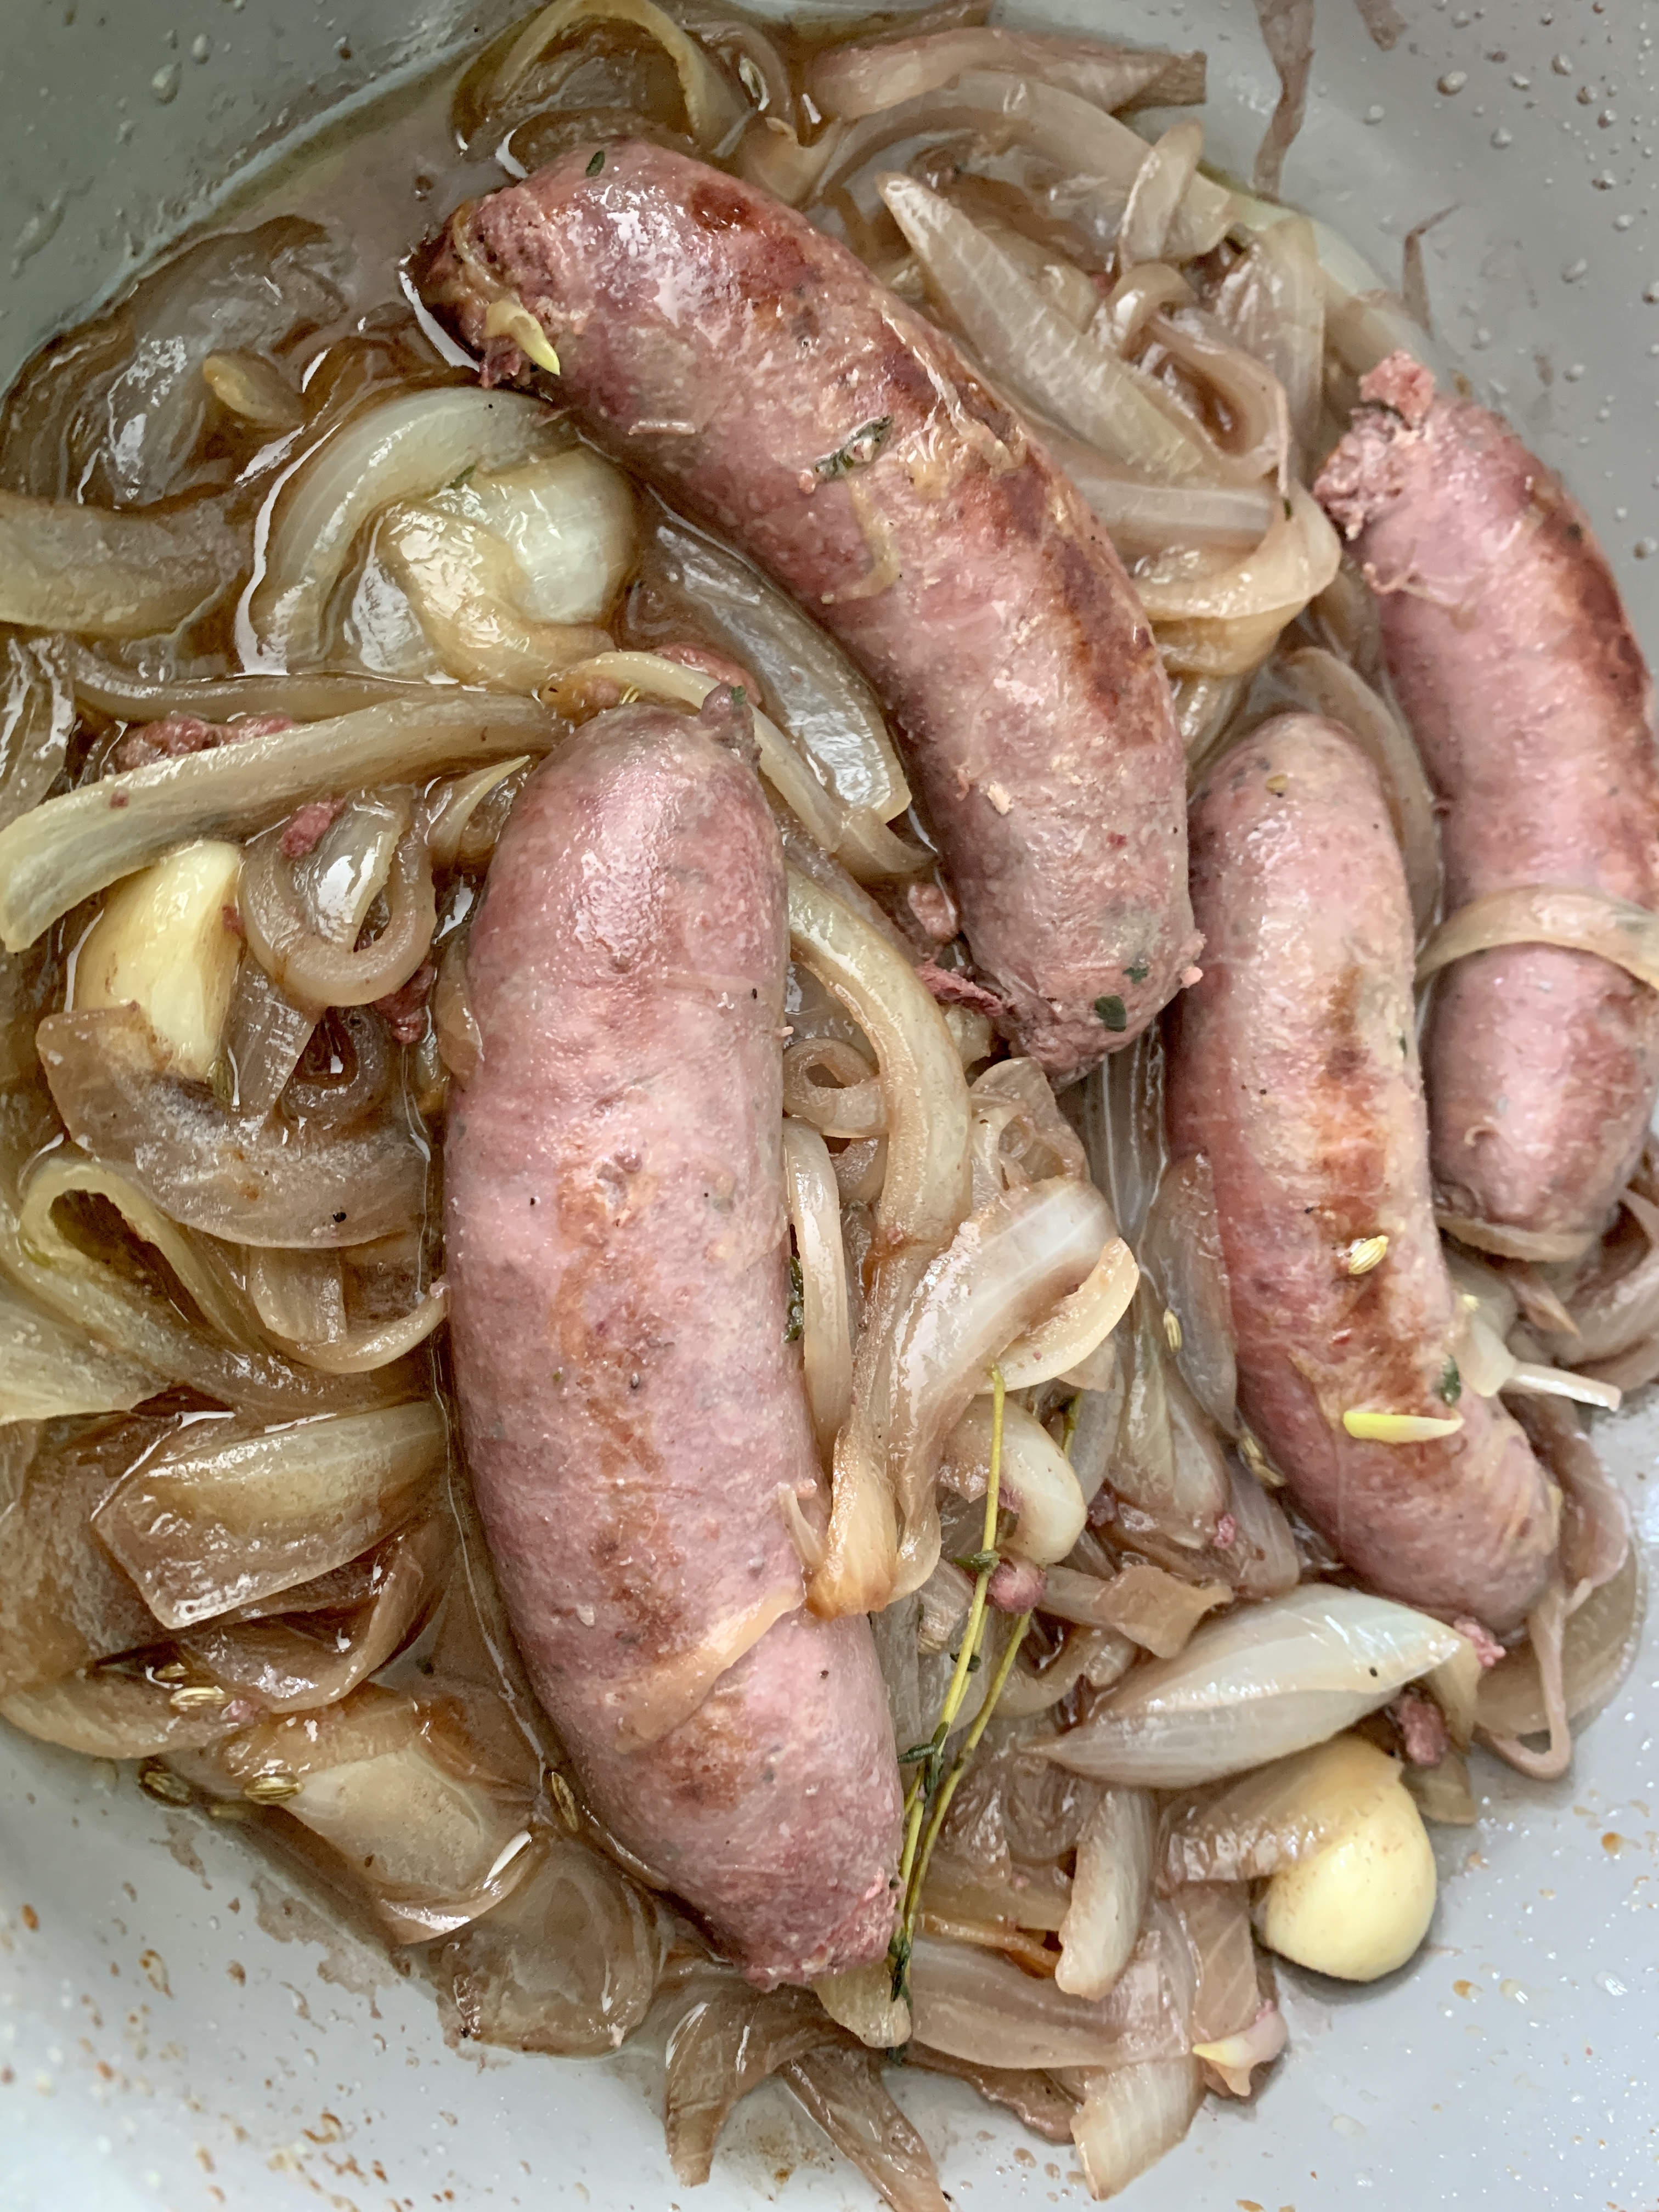 Liver Sausage And Polenta: Recipes At My Table